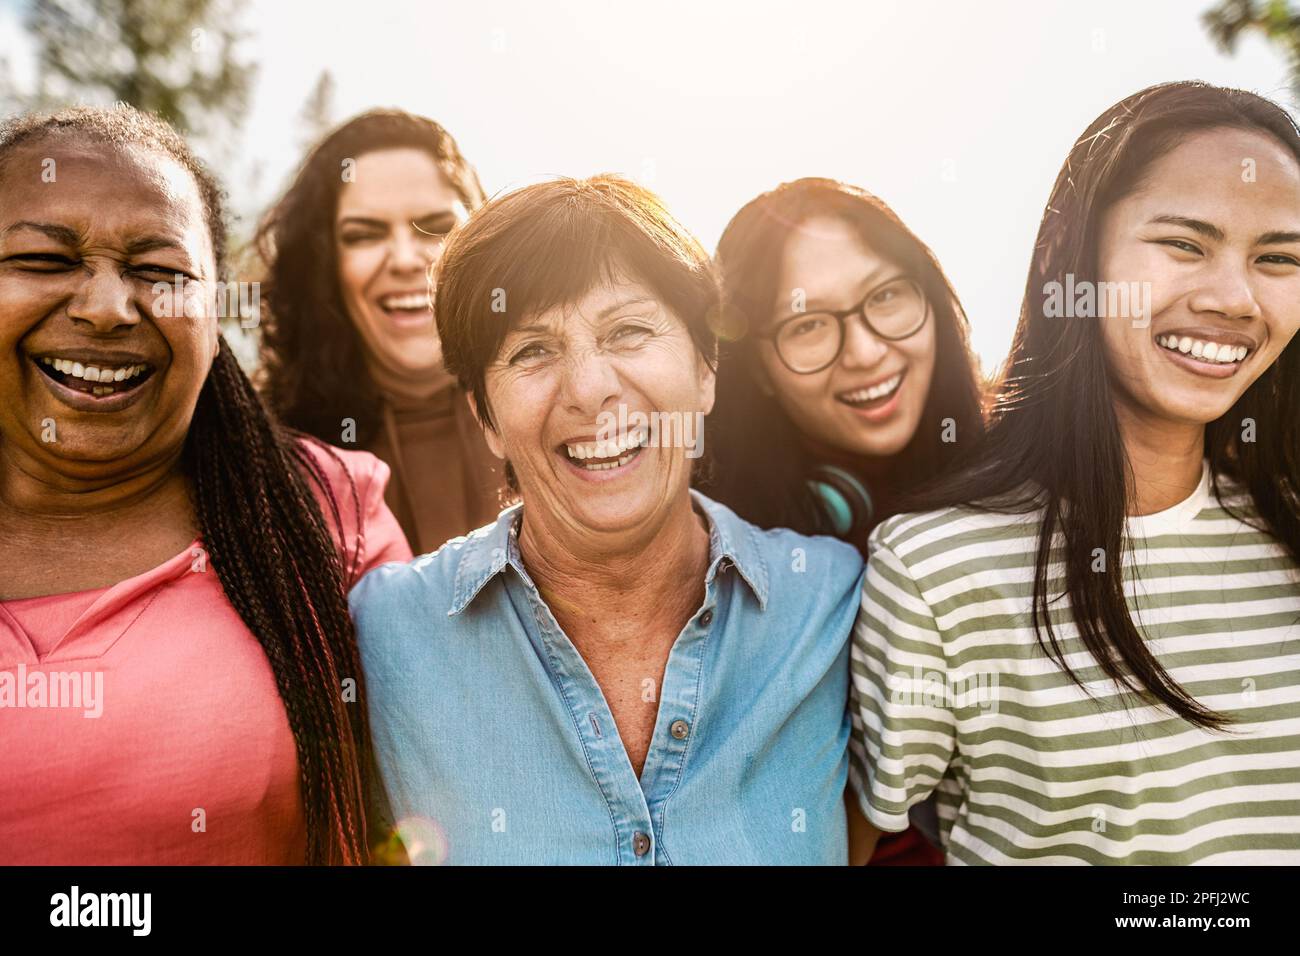 Happy multigenerational women with different age and ethnicity having fun smiling in front of camera in a public park Stock Photo